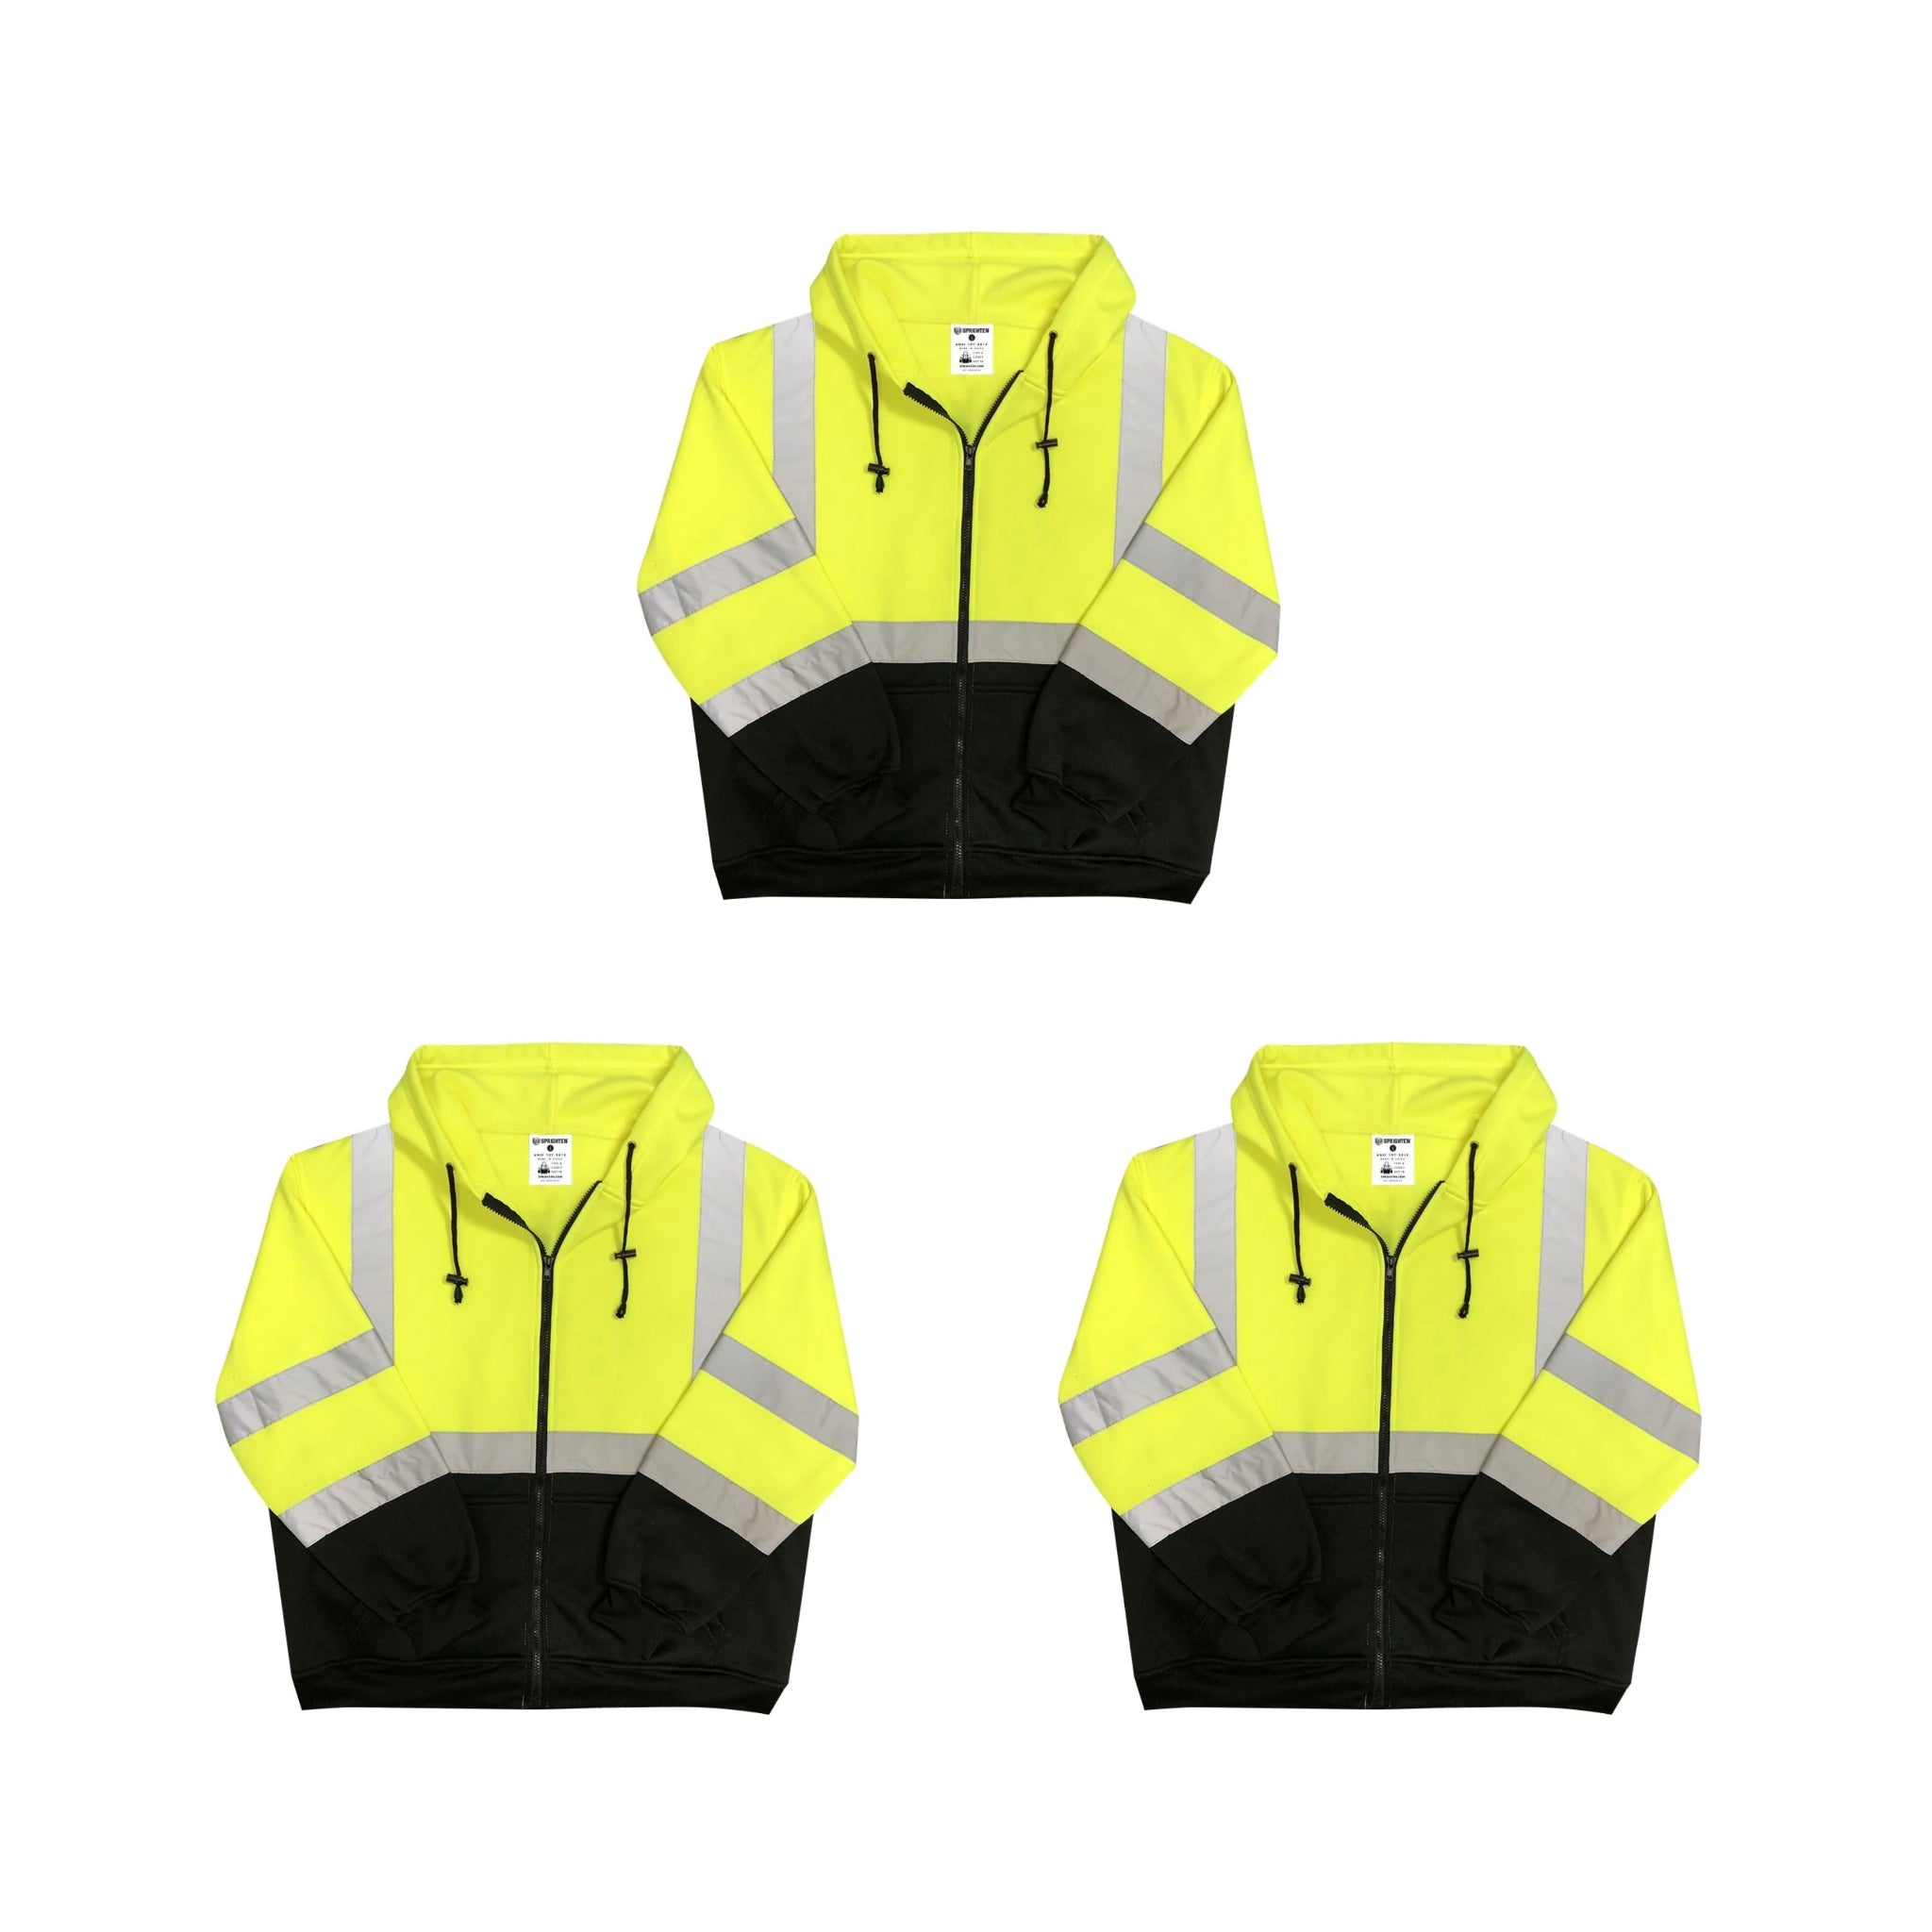 Safety Main 05LWJYB Lightweight Jacket, Class 3, Hi-Vis Yellow with Black Bottom, Pack of 3